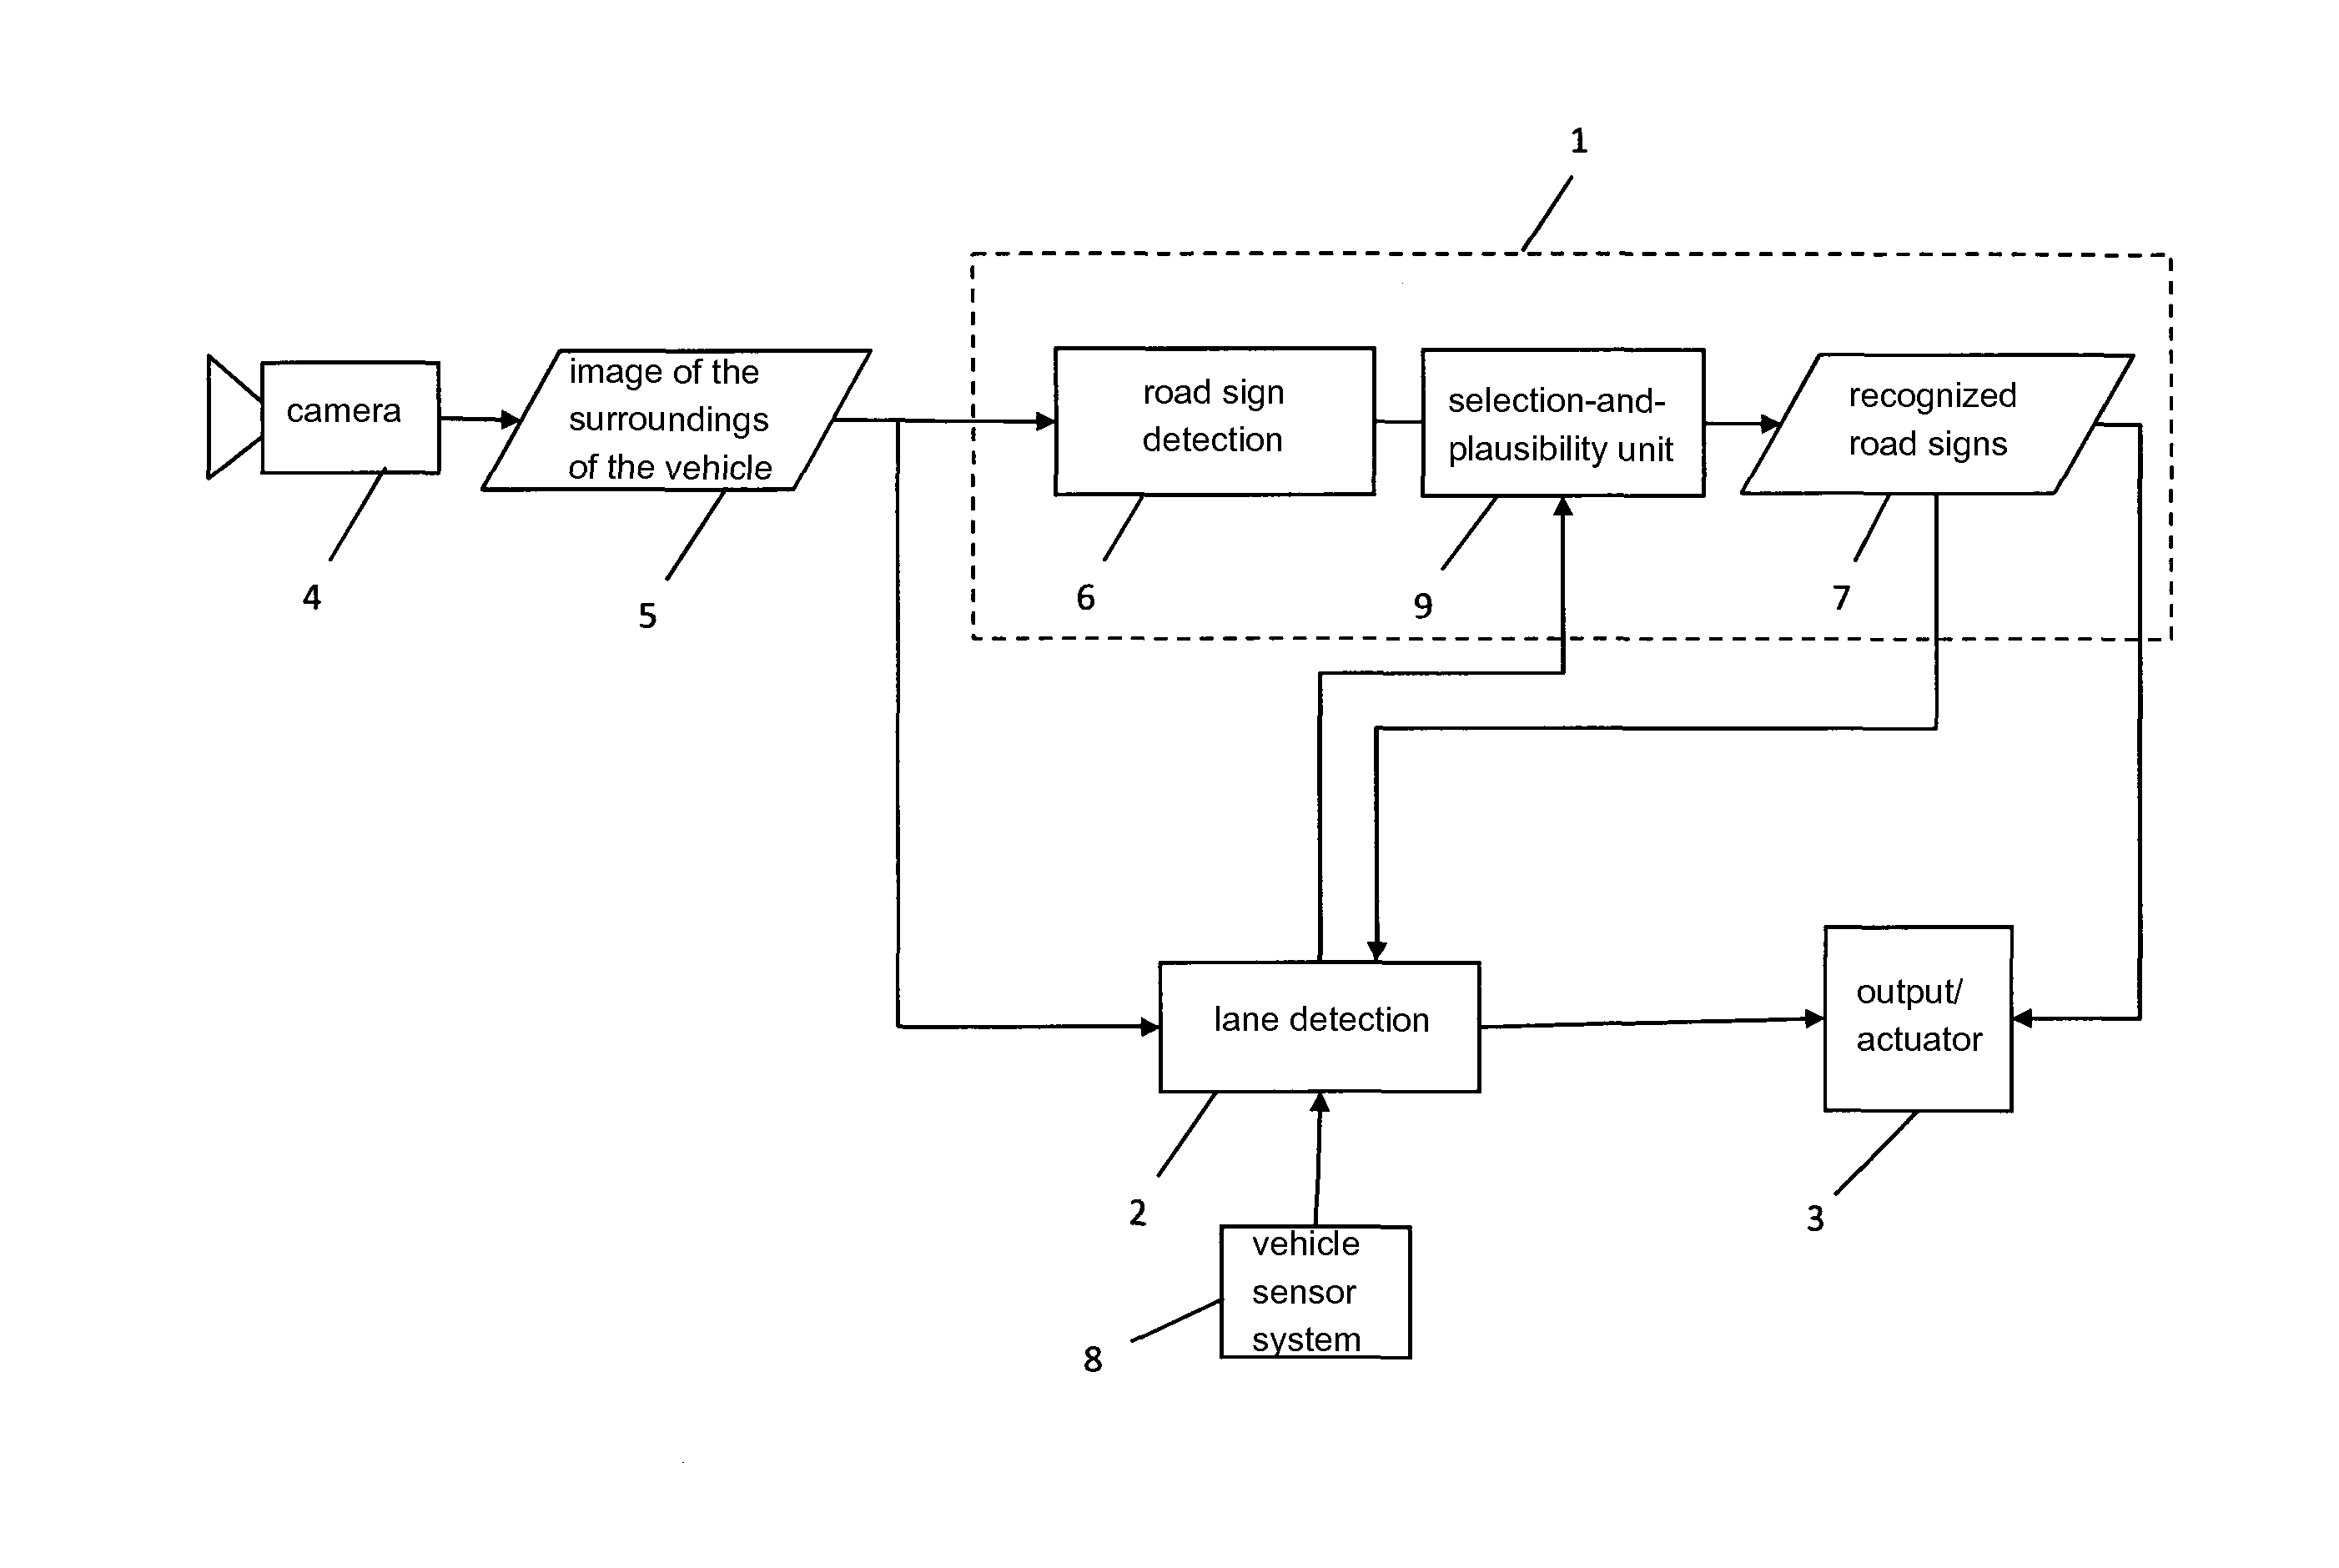 Method for combining a road sign recognition system and a lane detection system of a motor vehicle